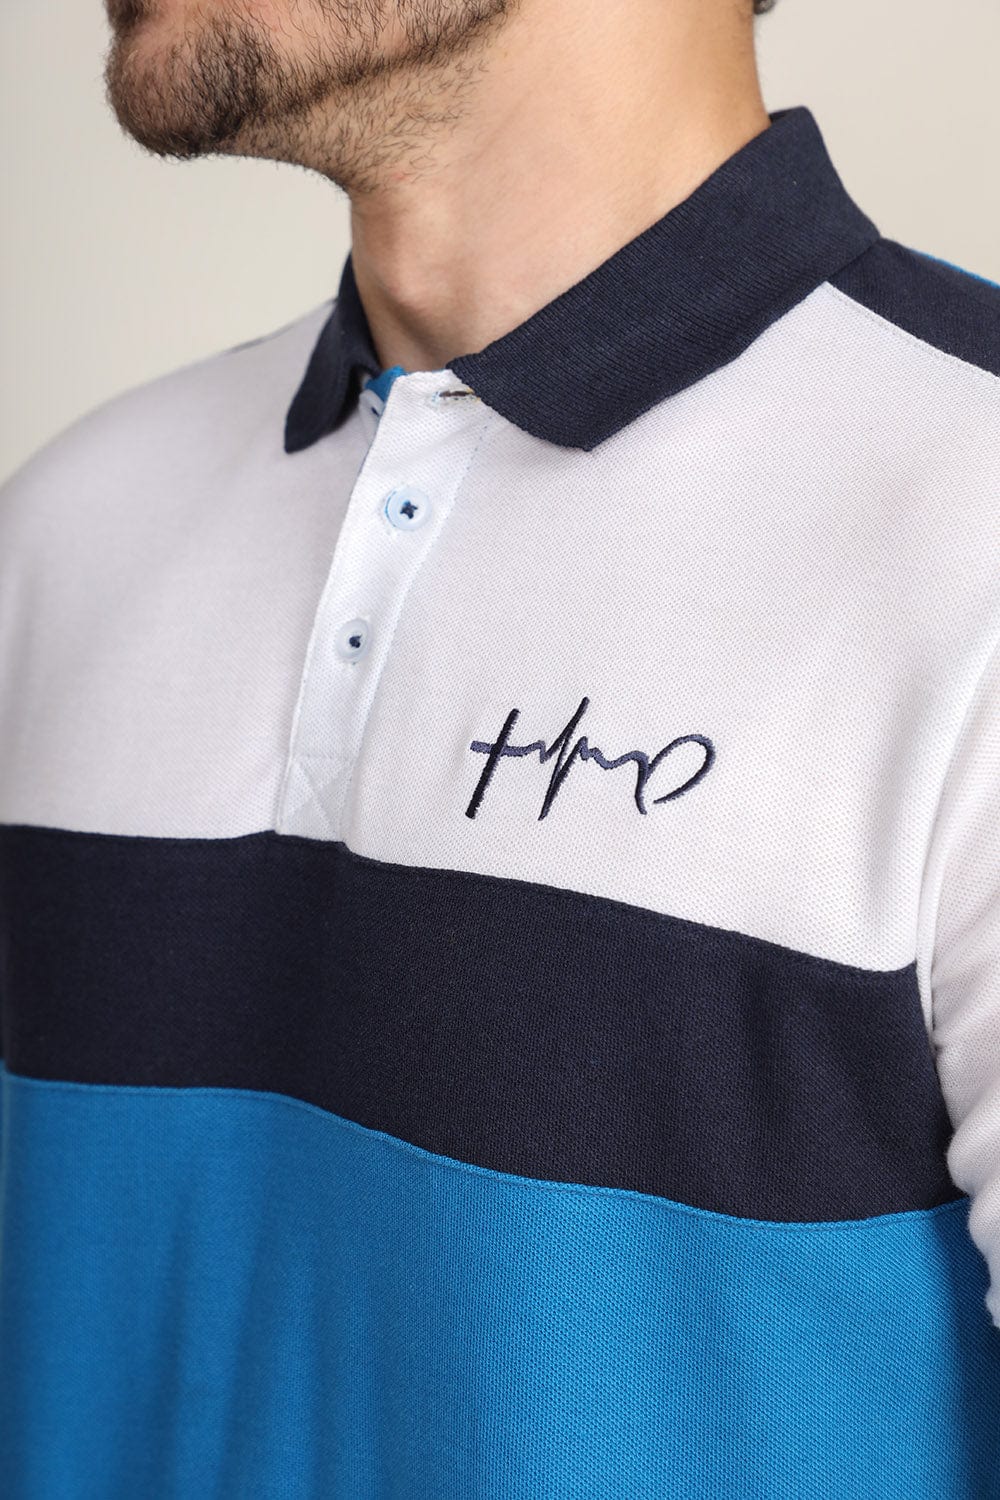 Hope Not Out by Shahid Afridi Men Polo Shirt Men Premium Signature Polo